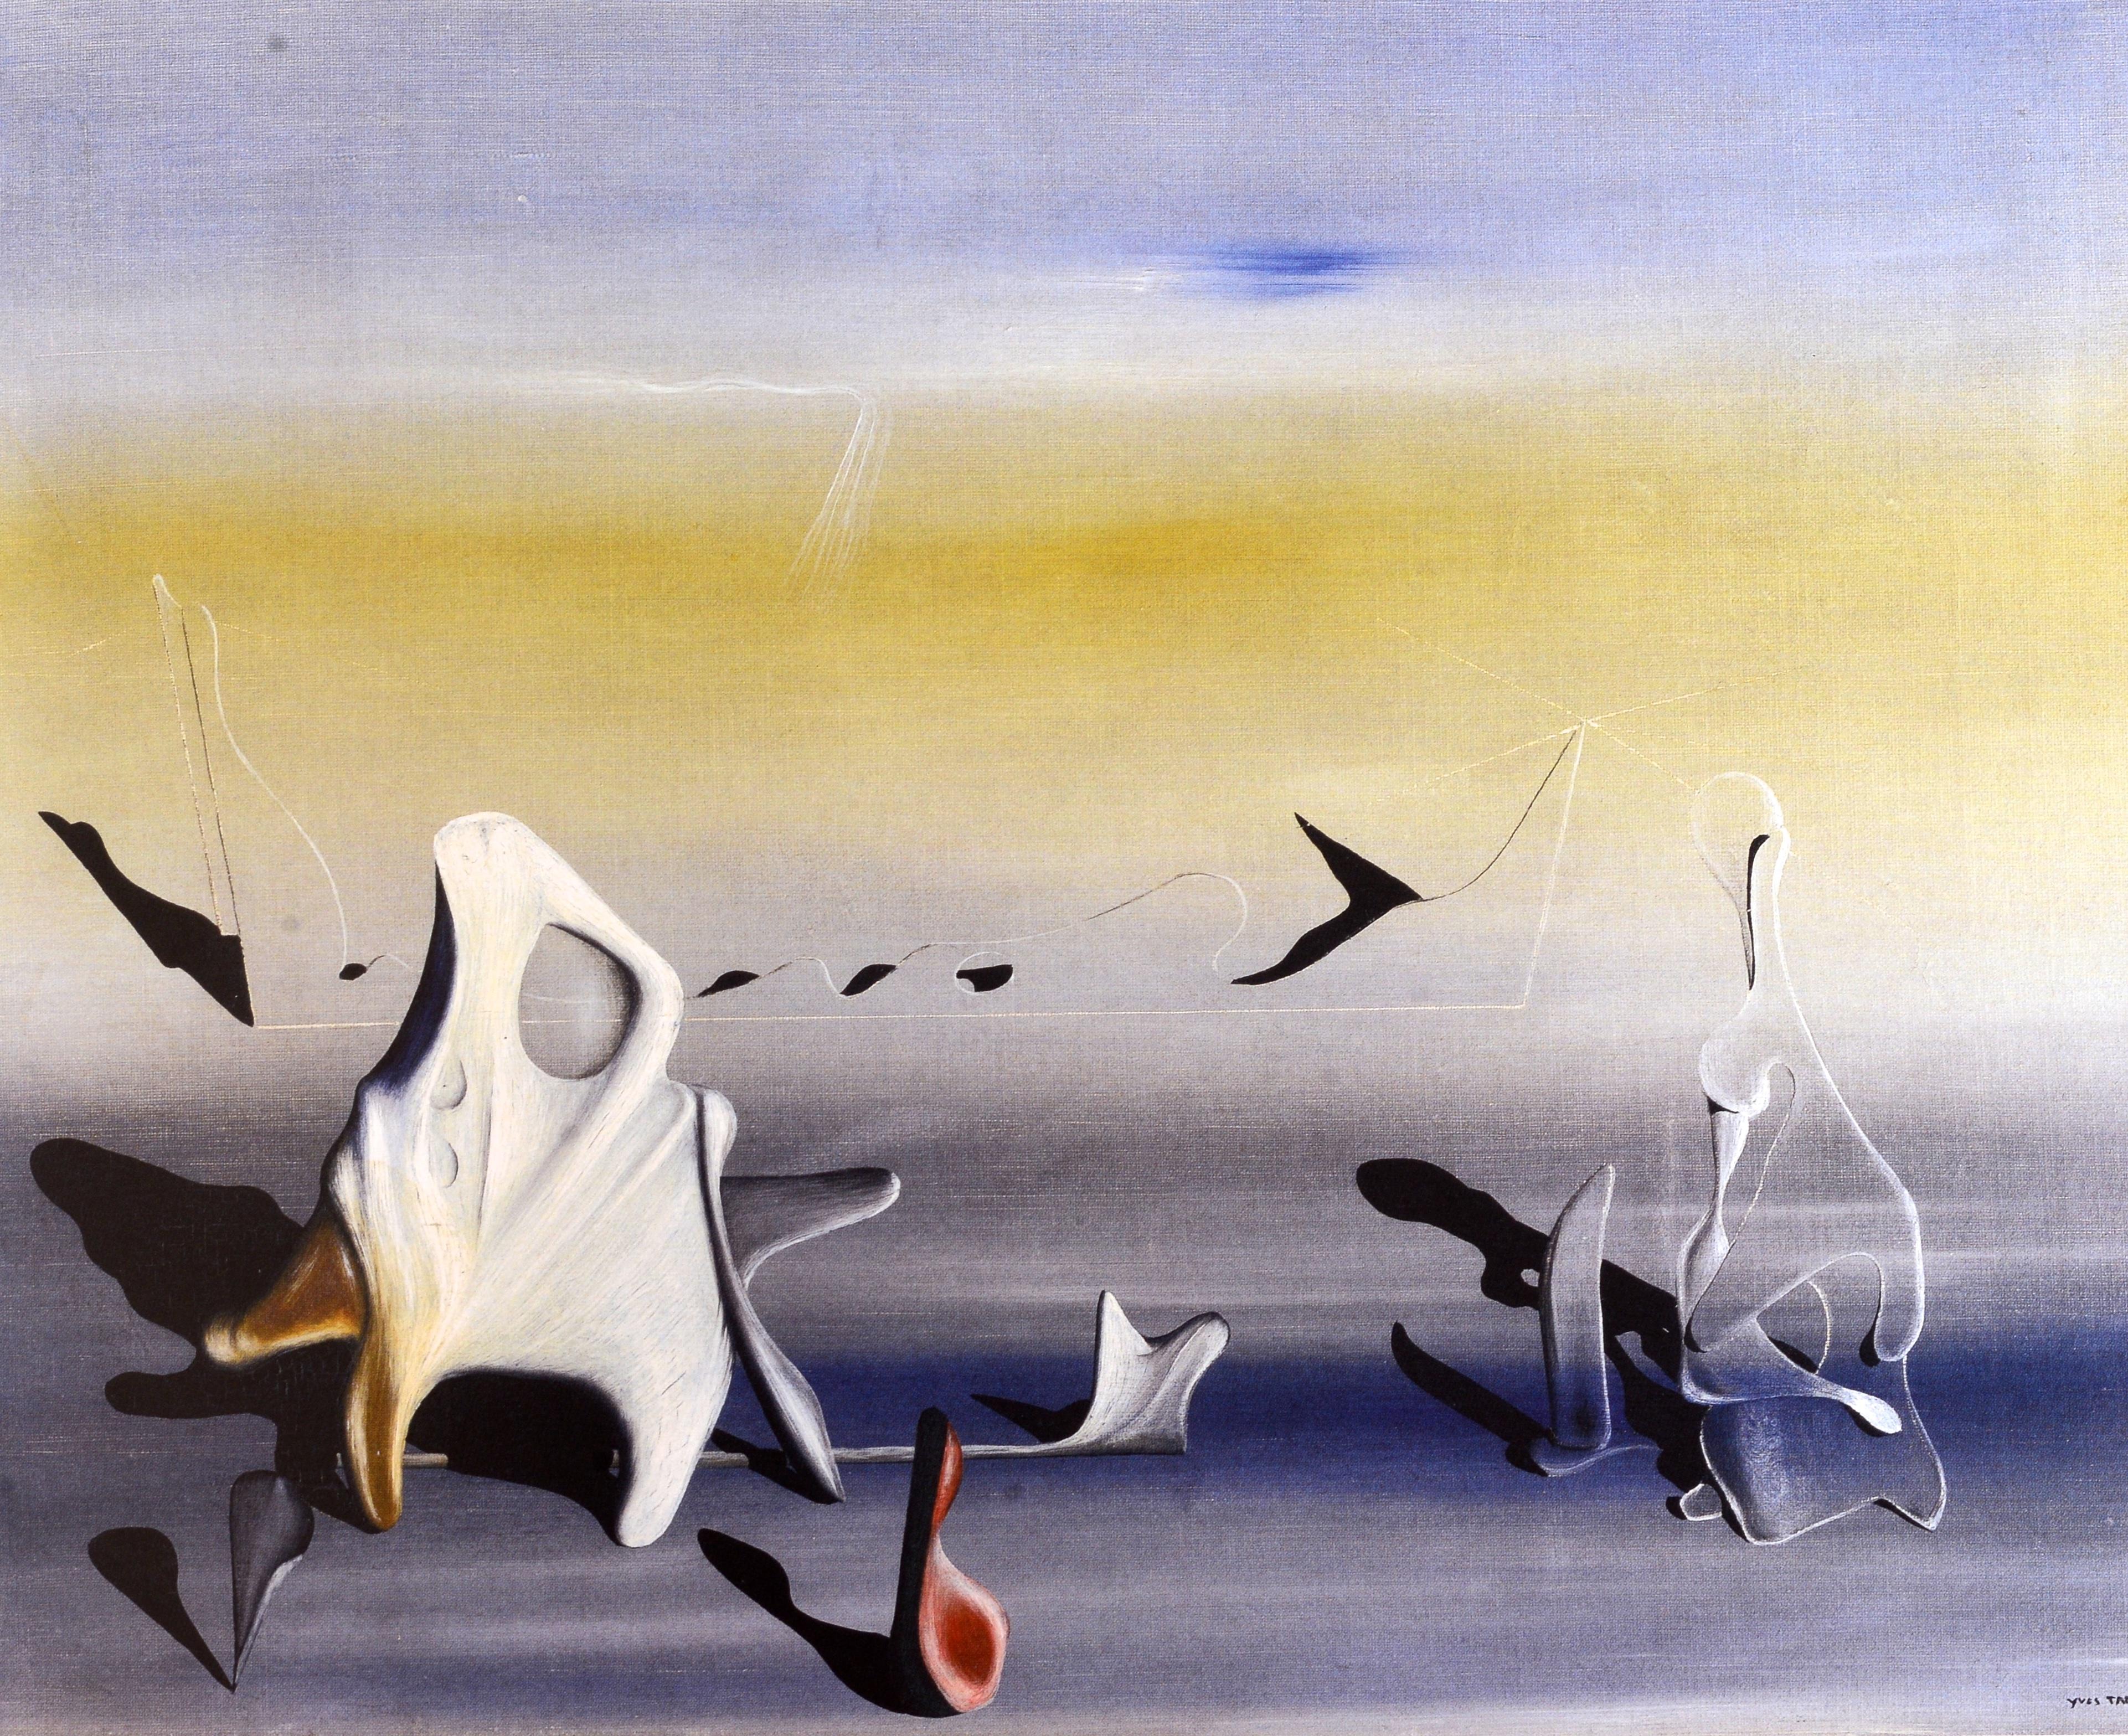 Yves Tanguy & Alexander Calder Between Surrealism and Abstraction, 1st Ed In Excellent Condition For Sale In valatie, NY